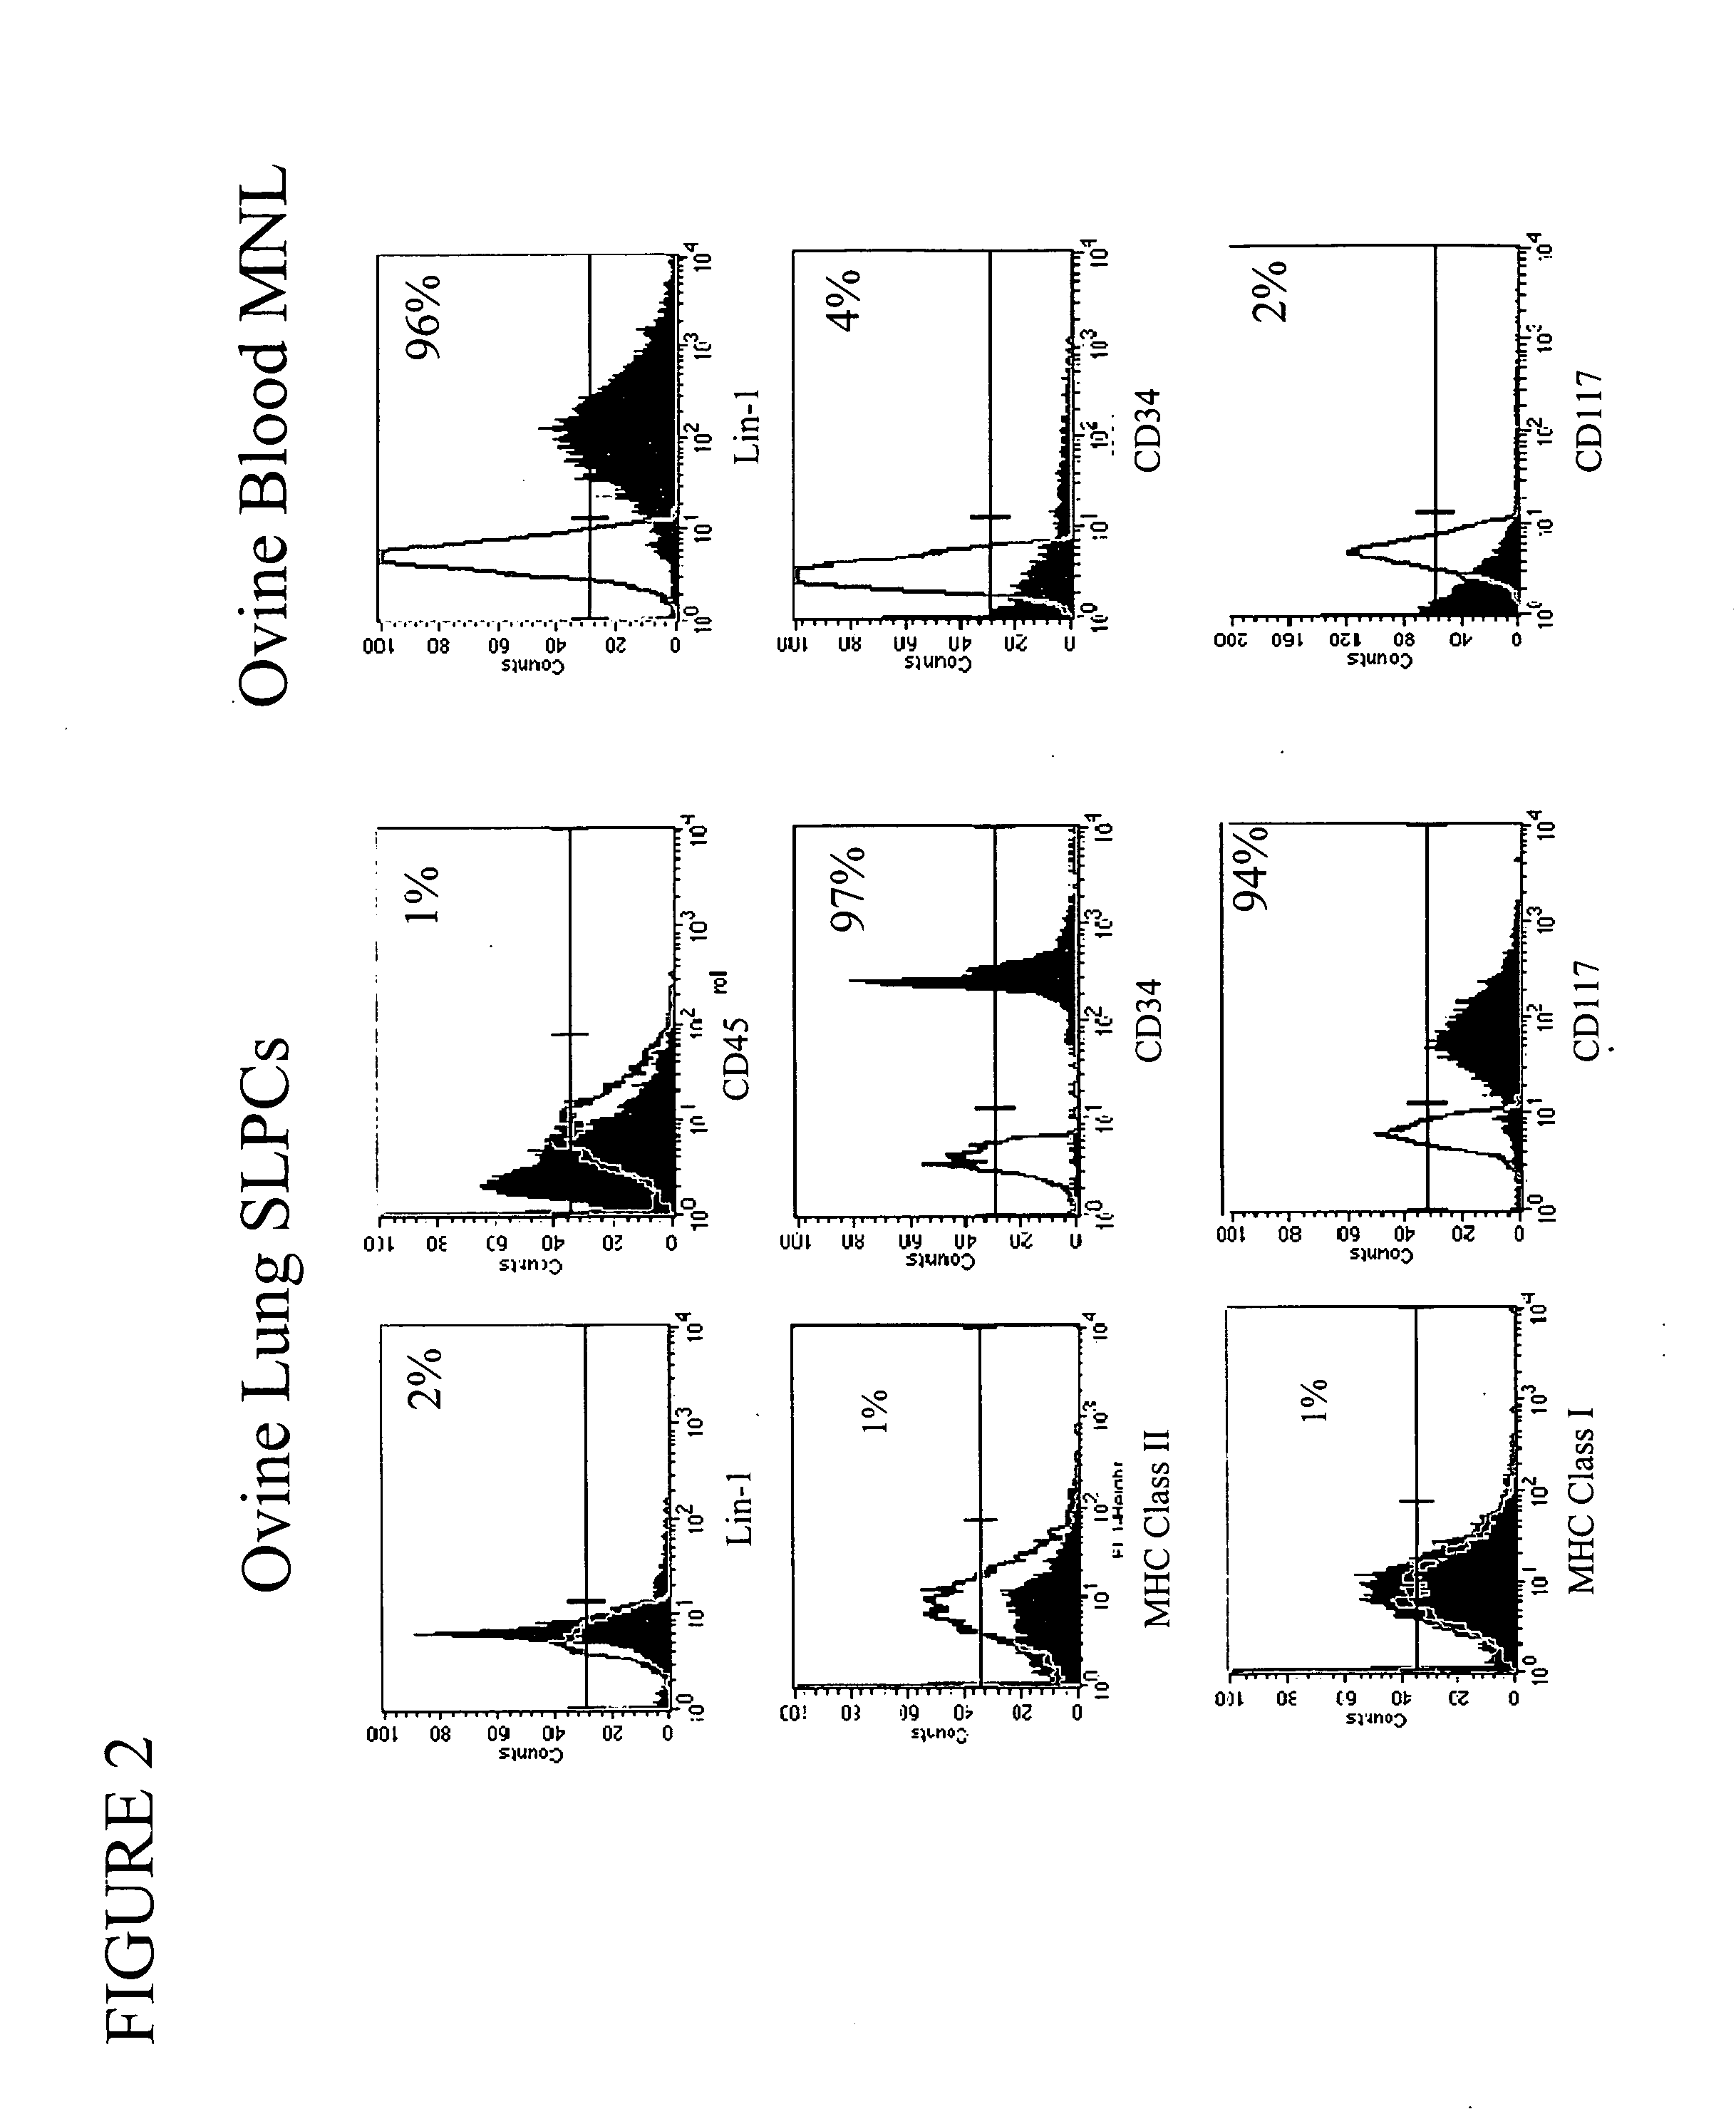 Engineered lung tissue, hydrogel/somatic lung progenitor cell constructs to support tissue growth, and method for making and using same